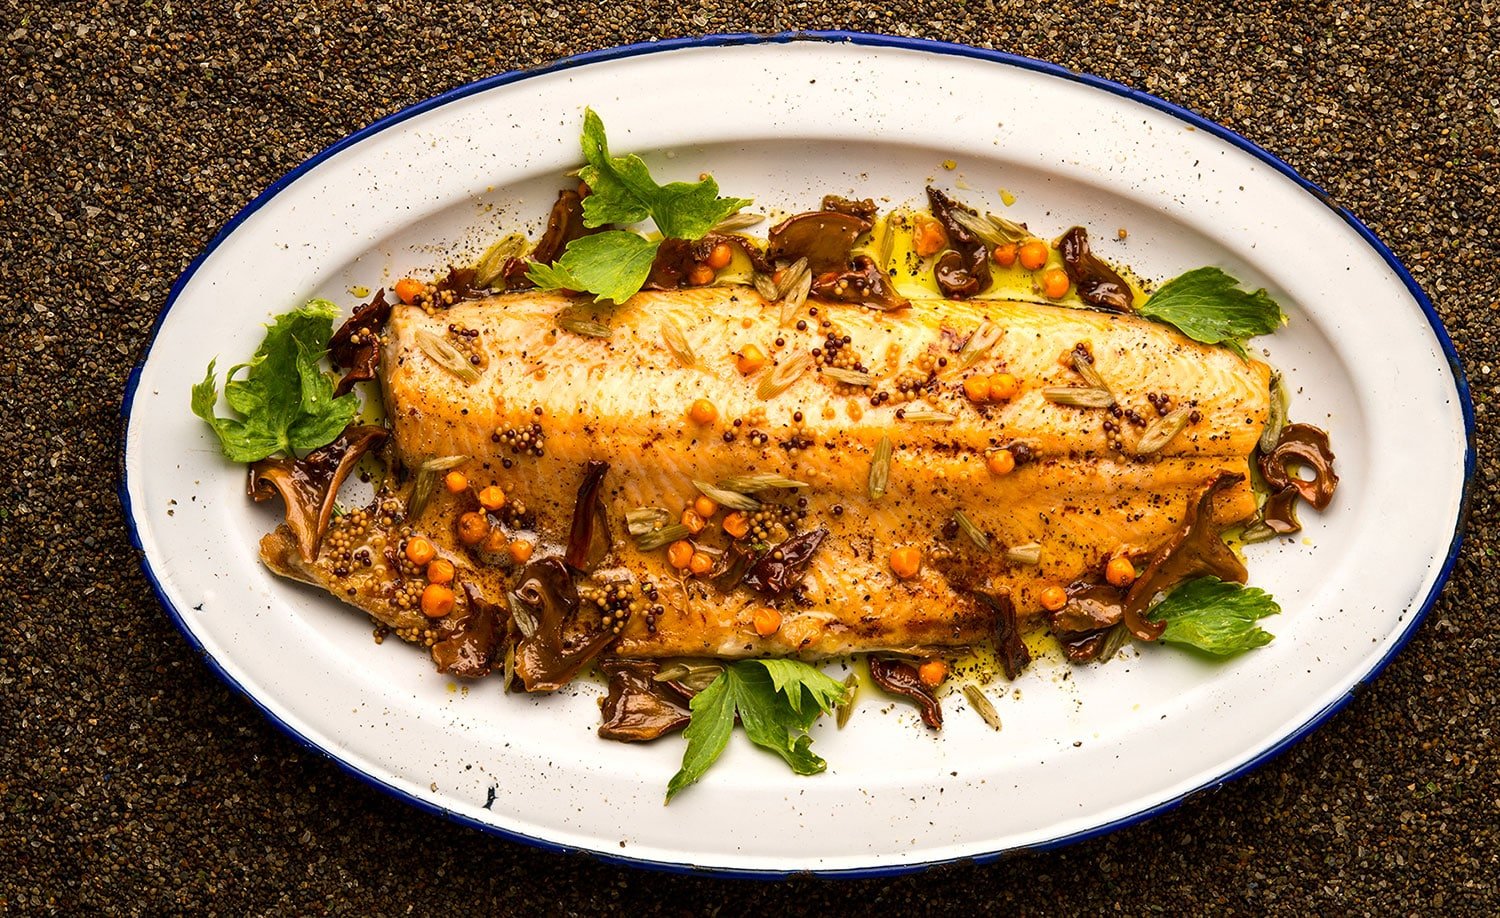 Broiled Trout - How to Broil Trout or Salmon